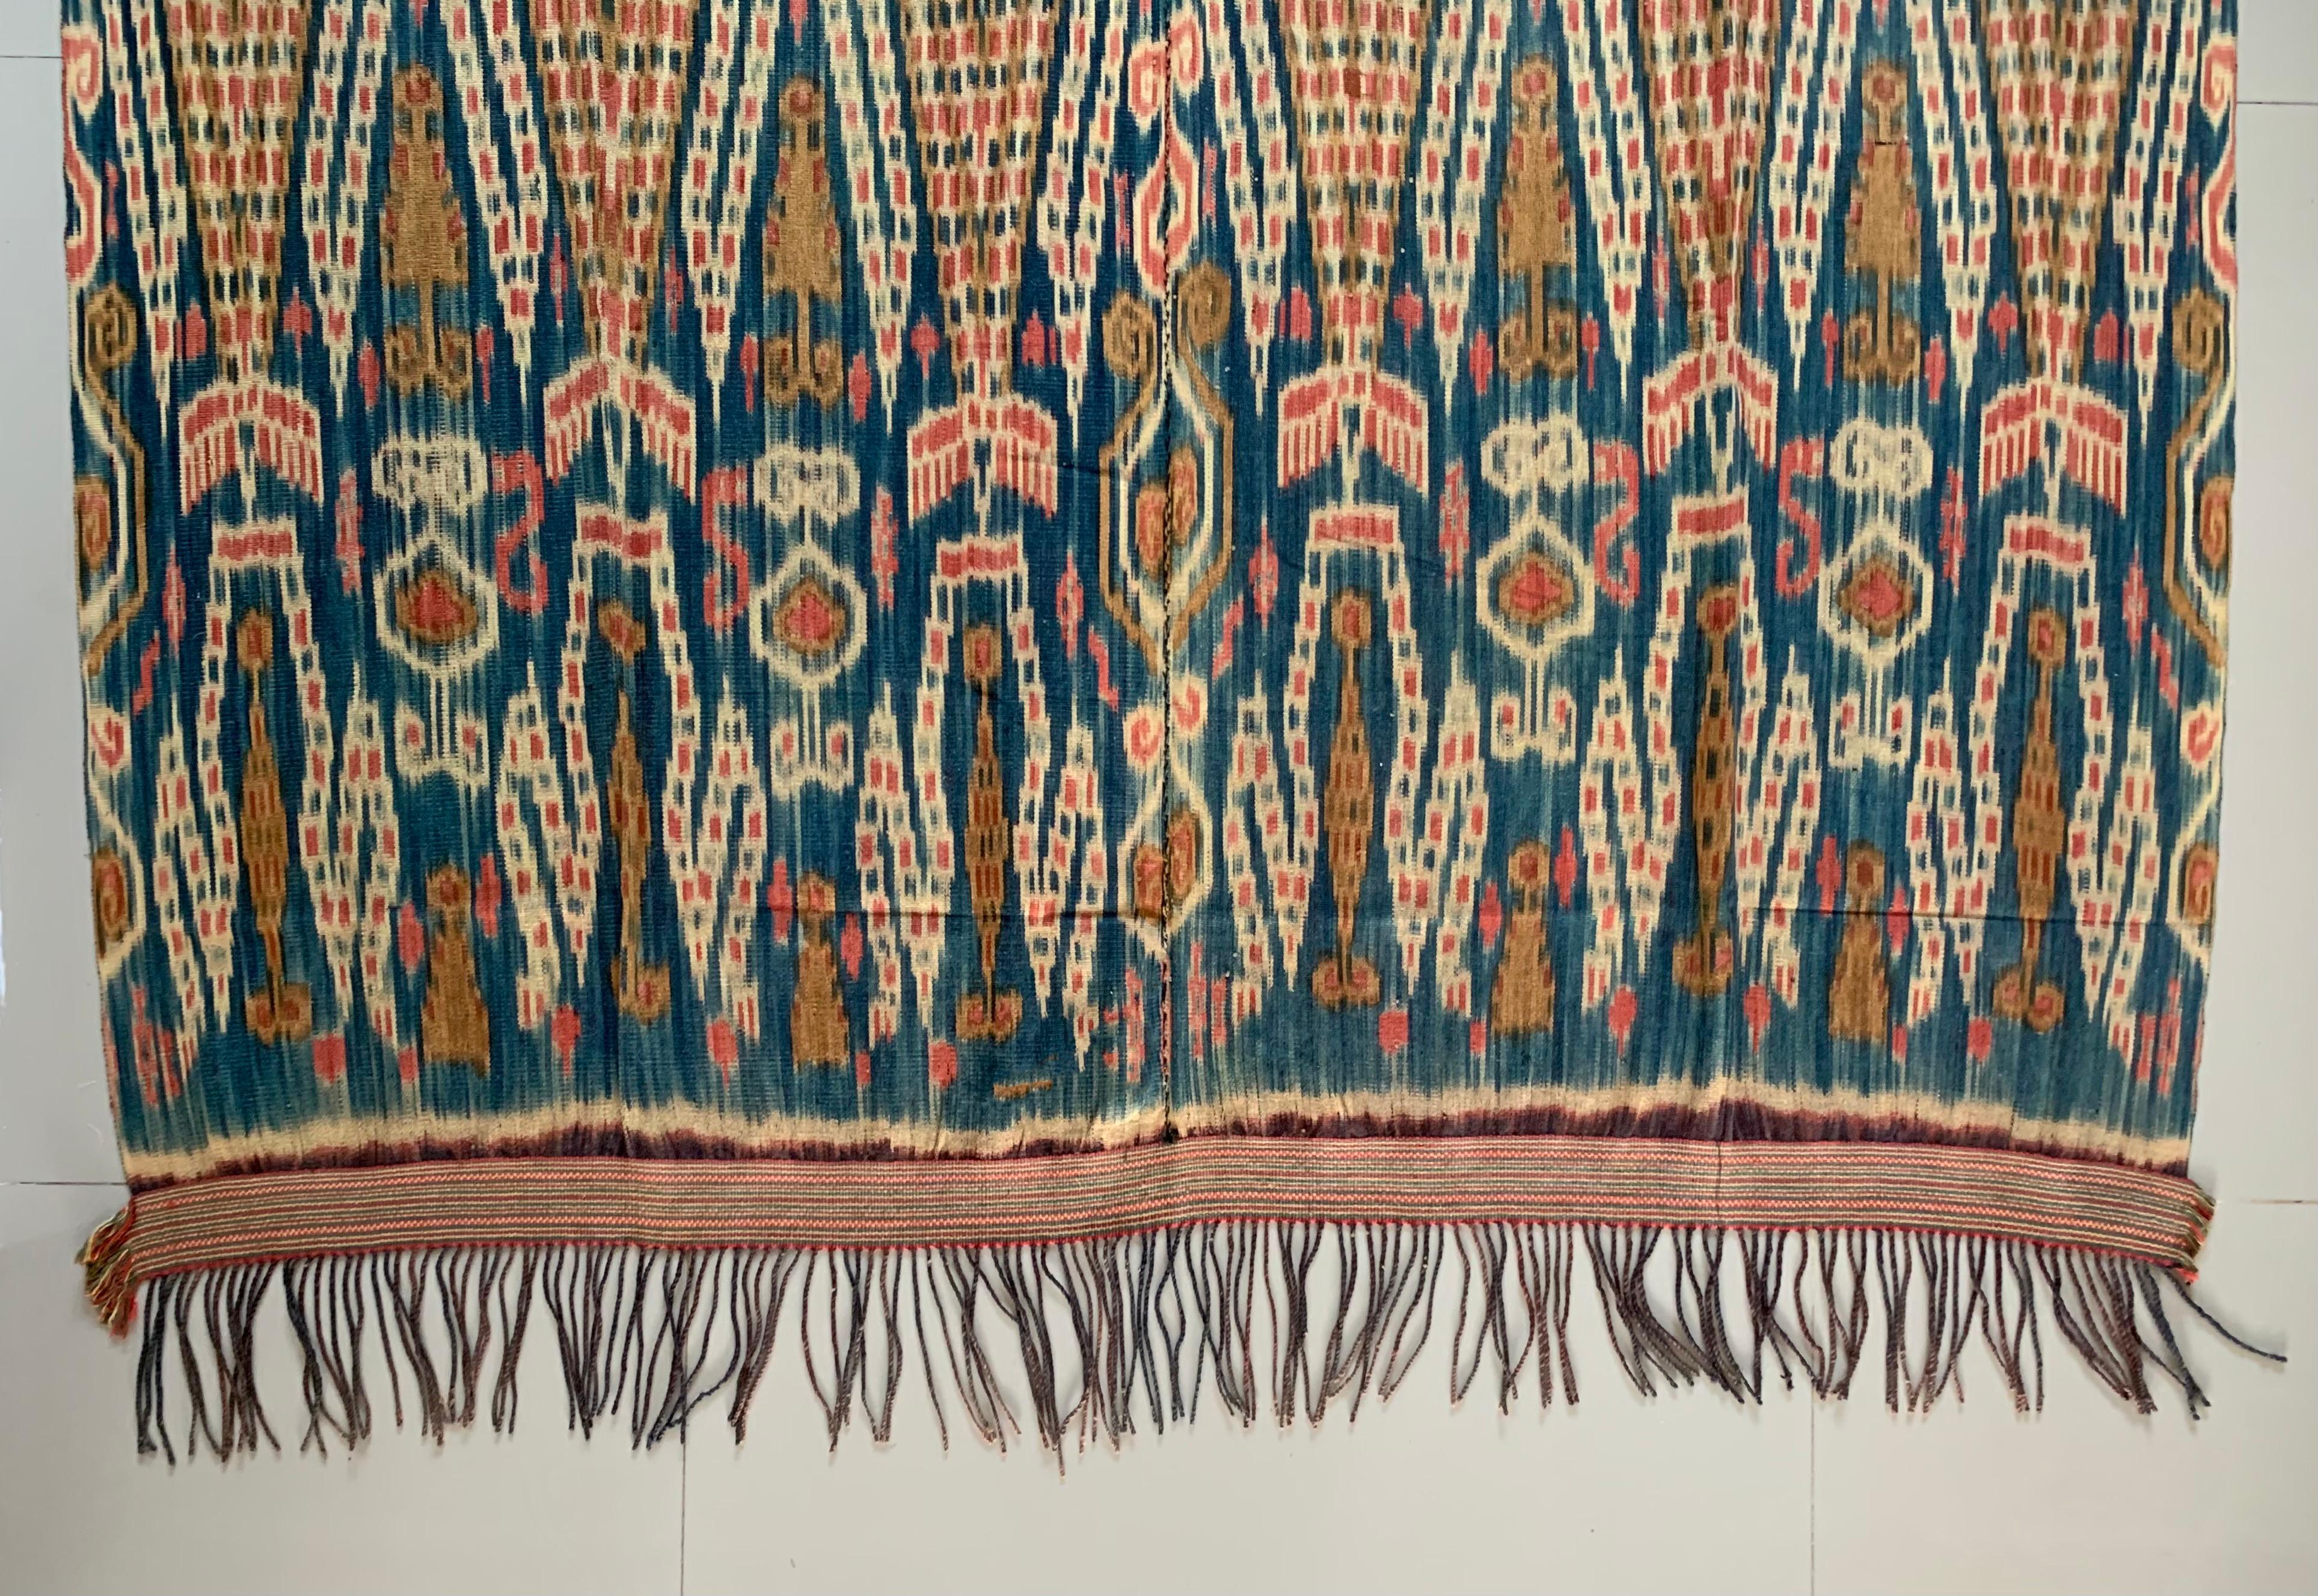 This Ikat textile originates from the Island of Sumba, Indonesia. It is hand-woven using naturally dyed yarns via a method passed on through generations. It features a stunning array of distinct tribal patterns in a predominantly orange hue.